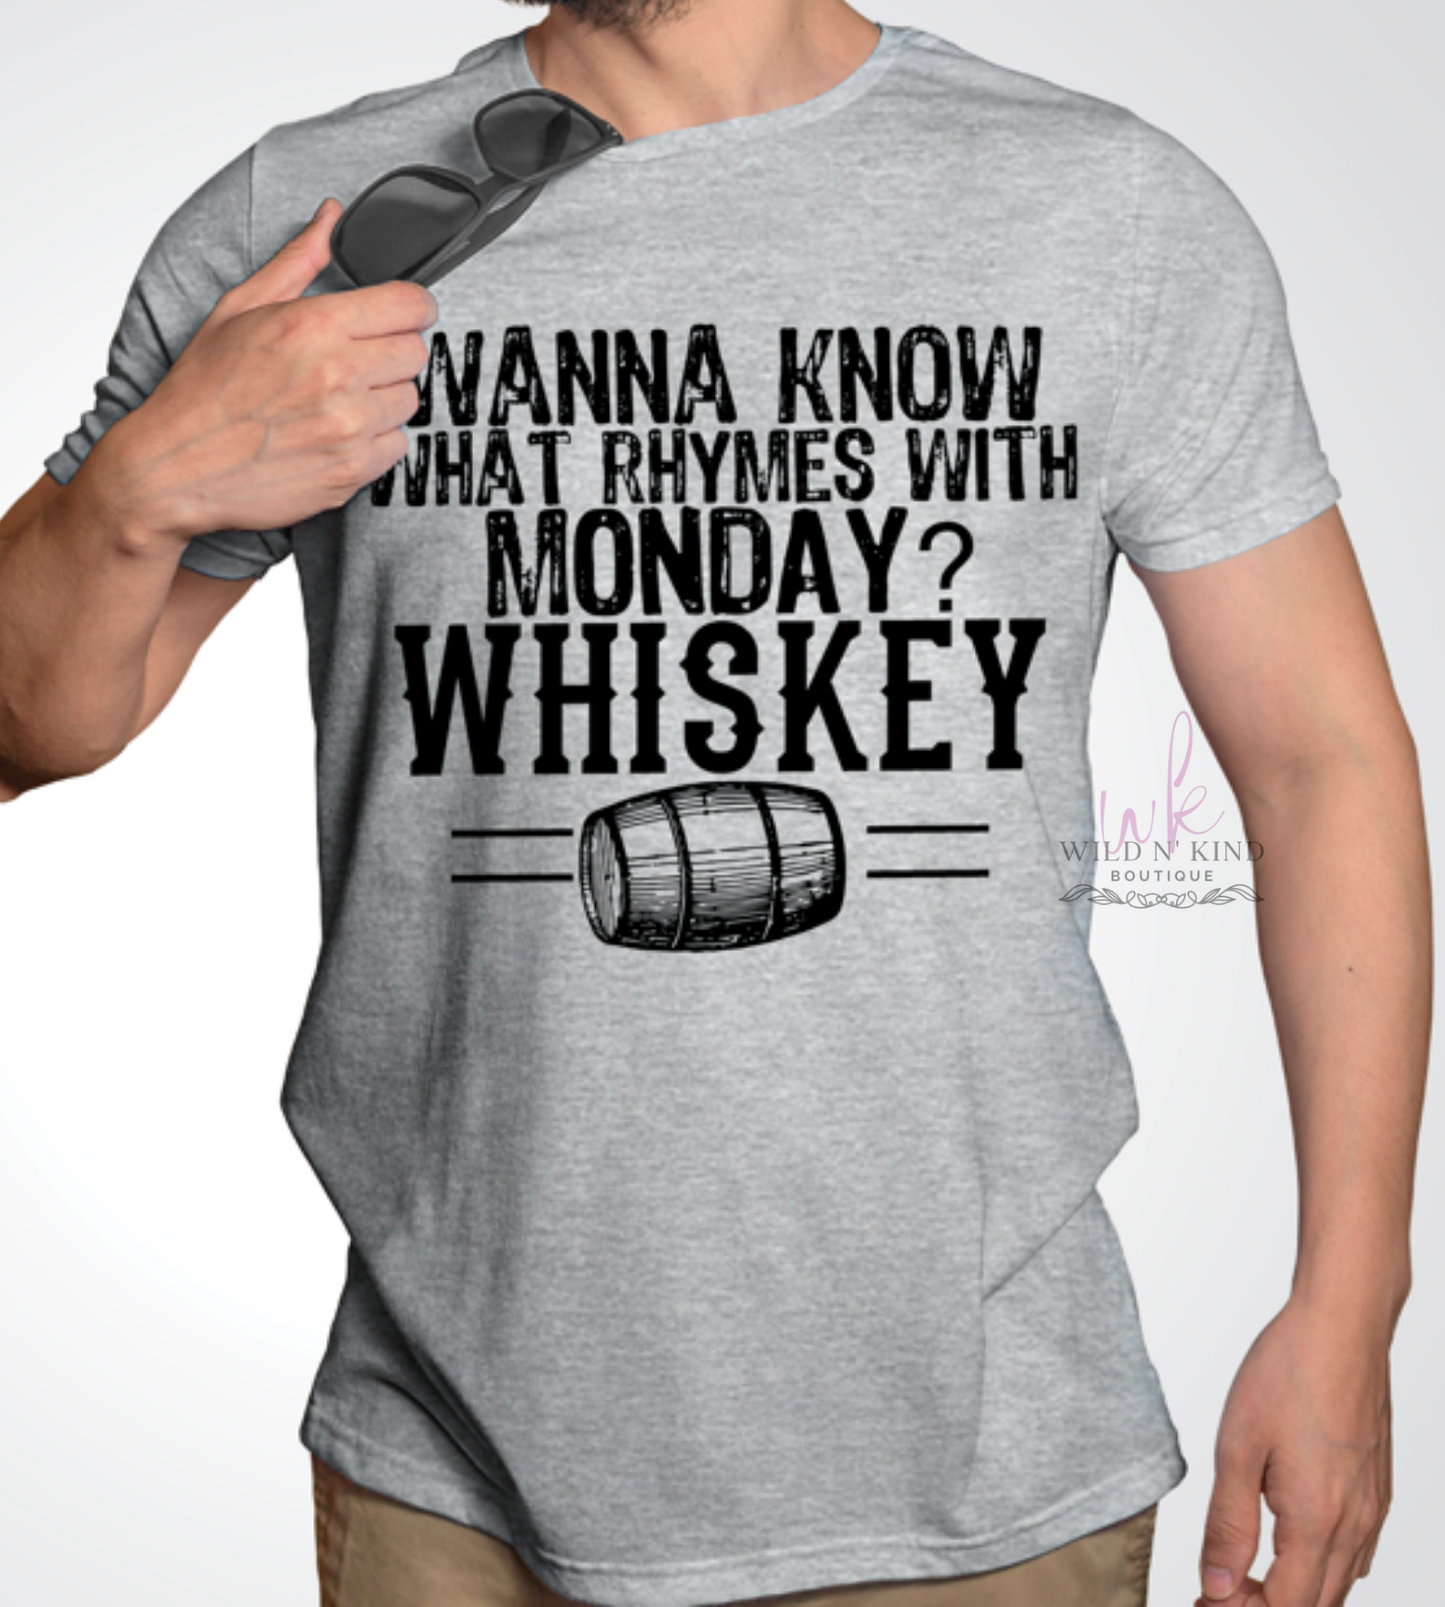 Rhymes with Monday? Whiskey